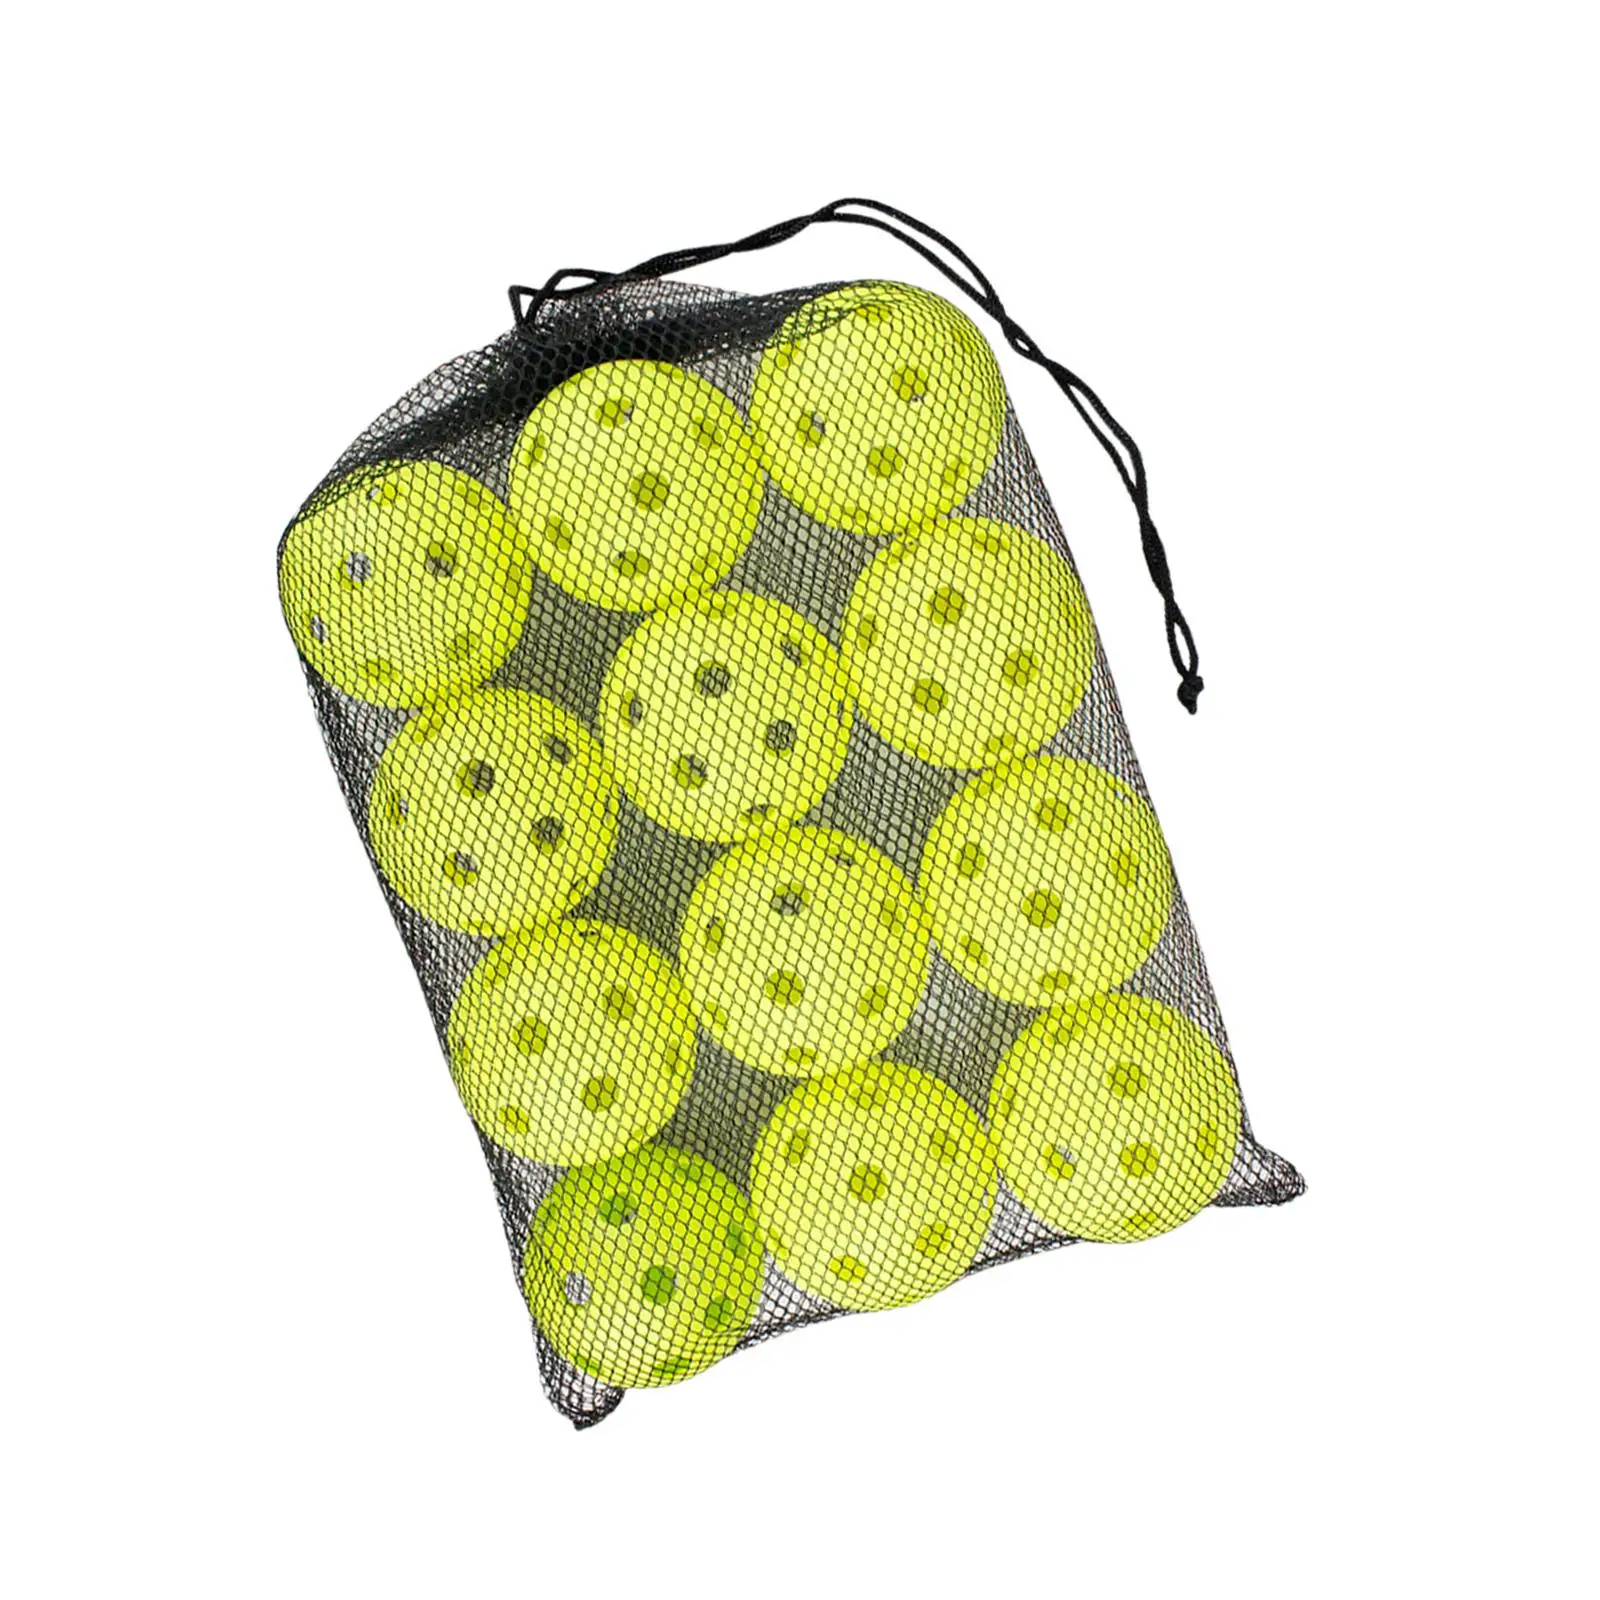 Pack of 12 pickleball balls, professional quality standard, specially designed